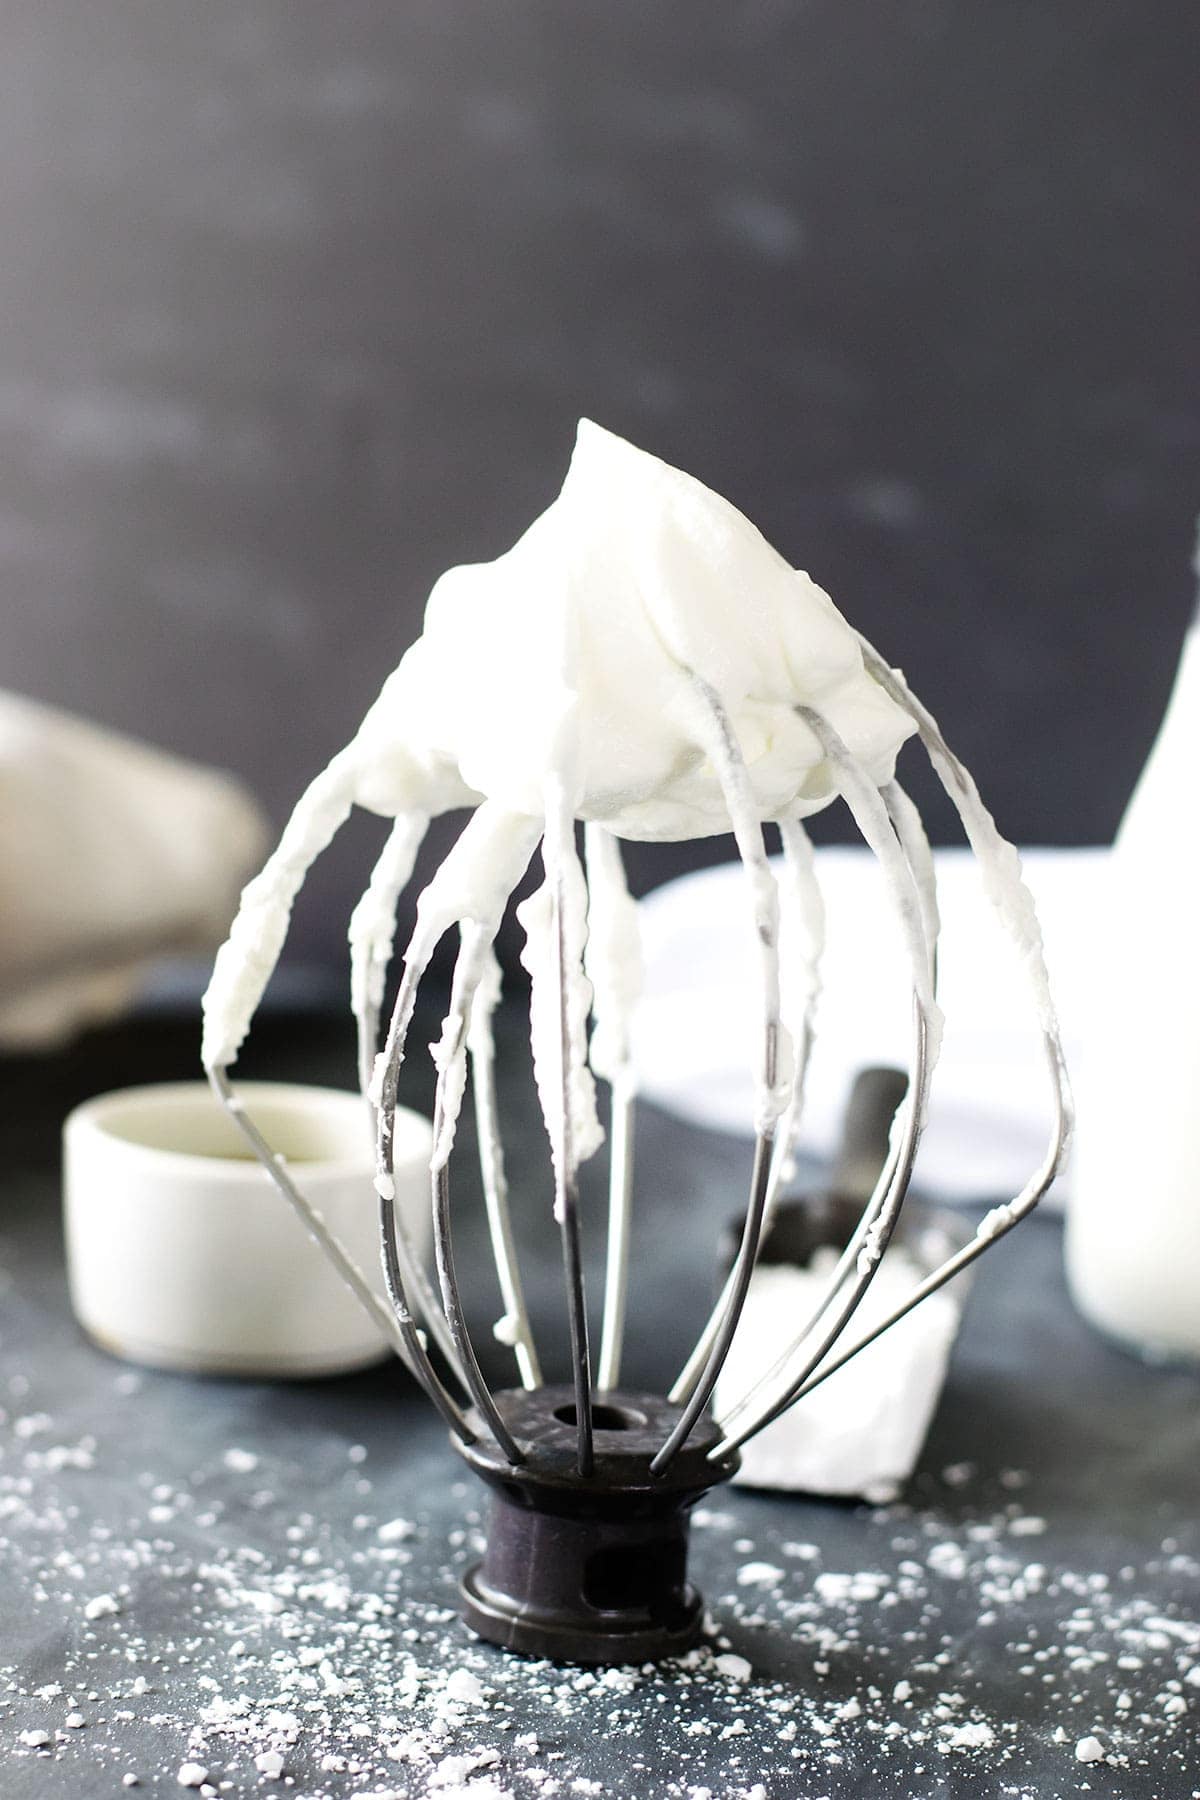 A stand mixer whisk with fluffy whipped cream on top.